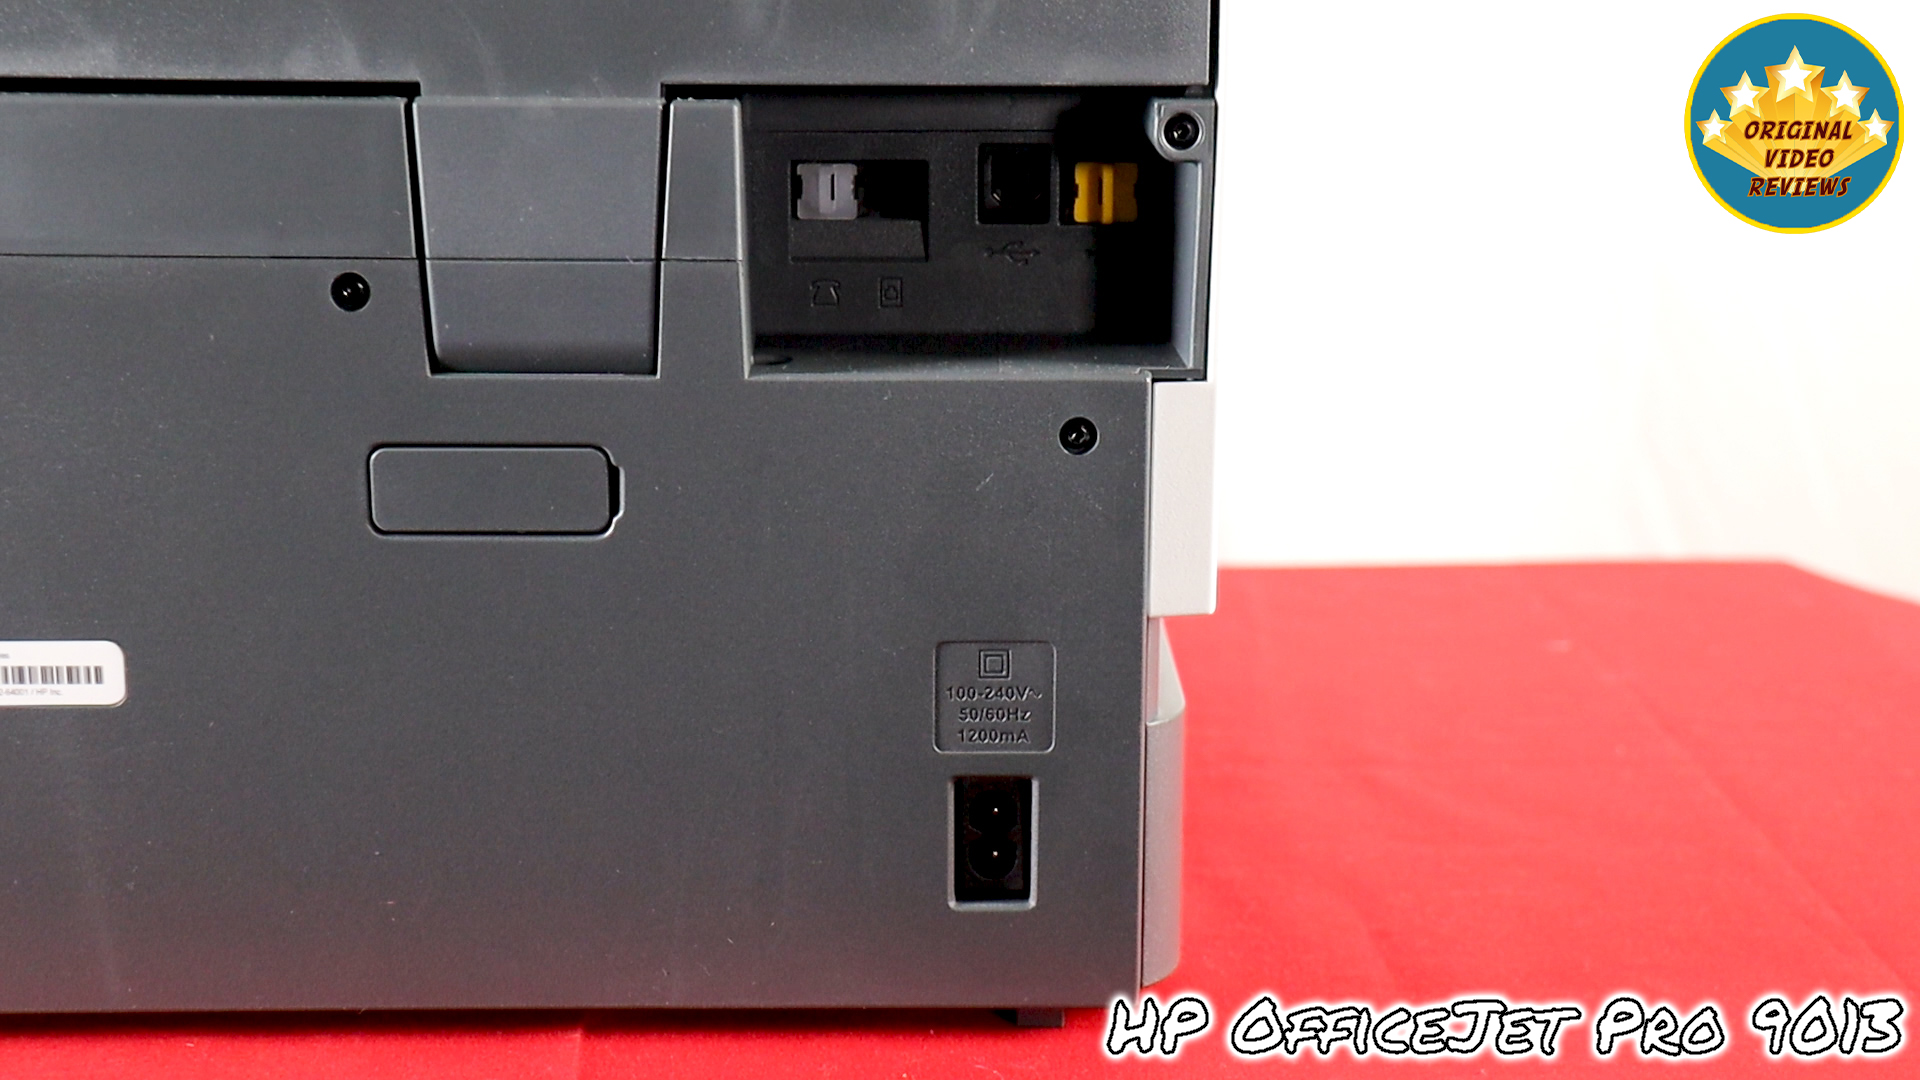 HP OfficeJet Pro 9013 All-in-One (Review) - Original Video Reviews